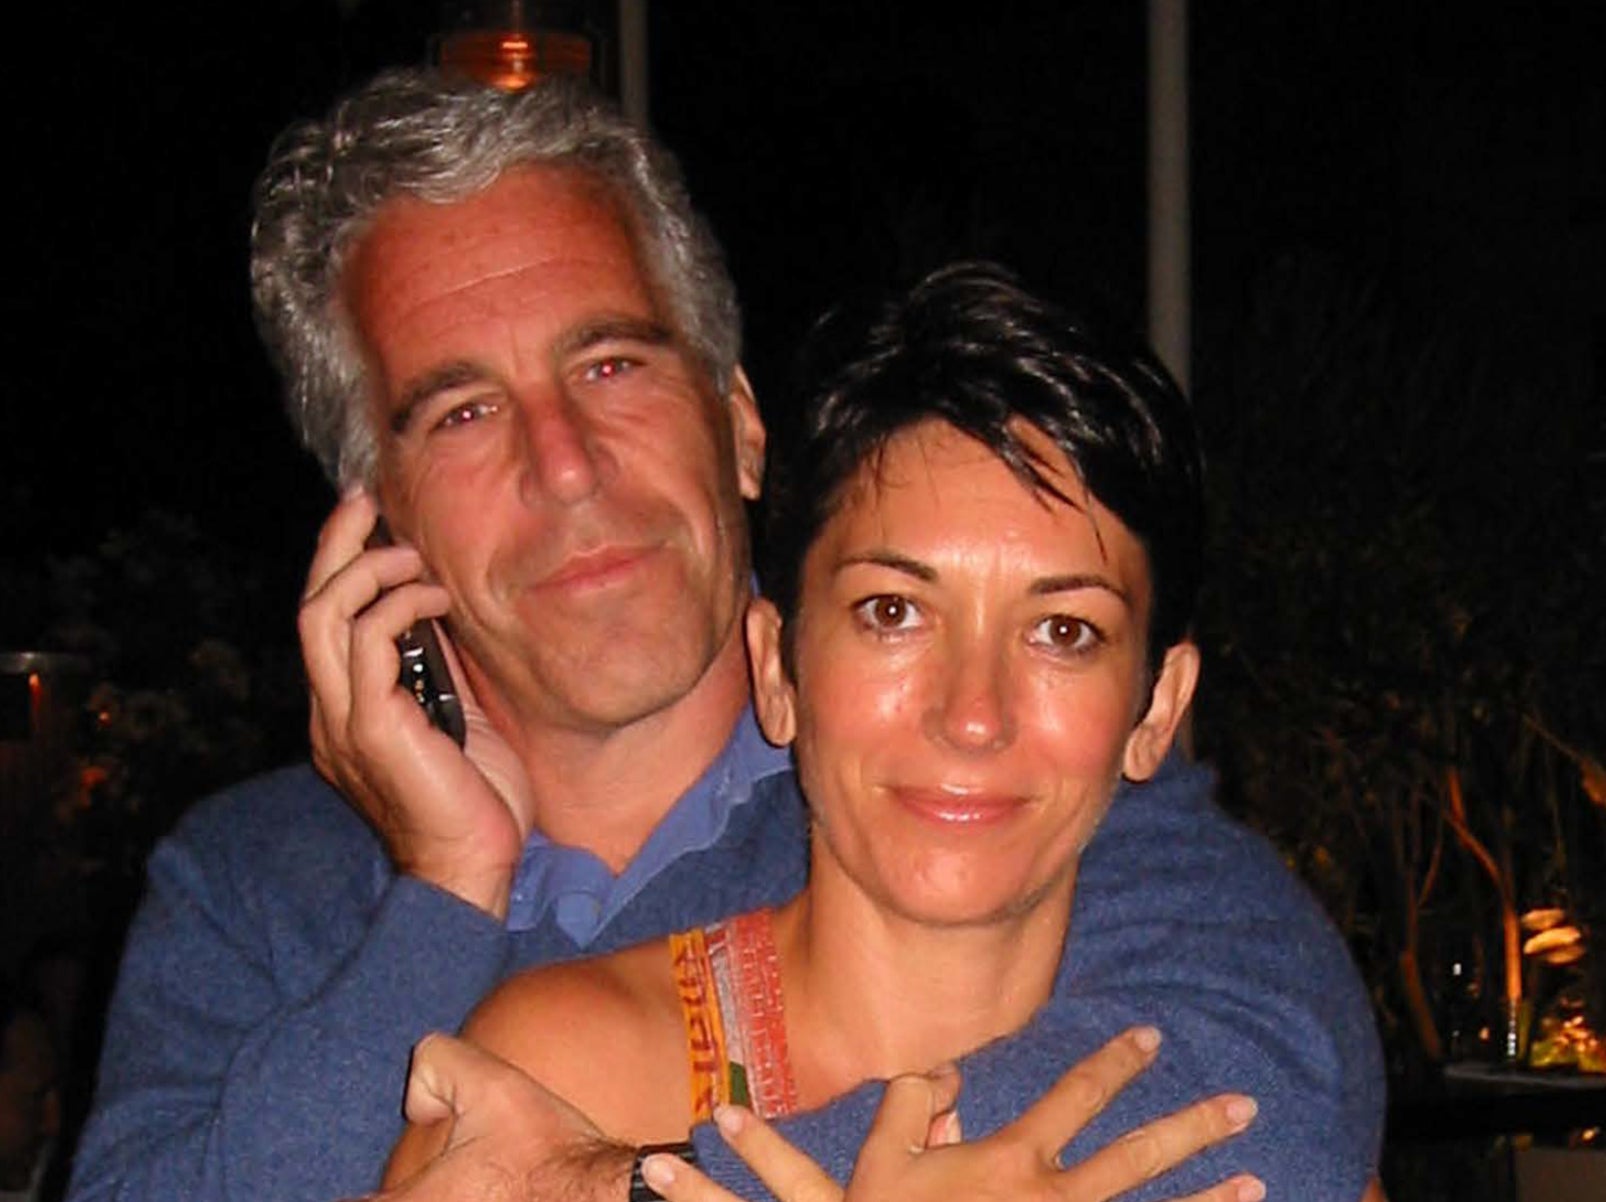 Jeffrey Epstein was found dead in a prison cell in 2019 while awaiting trial for sex trafficking. British socialite Ghislaine Maxwell was convicted on similar charges and jailed for 20 years in 2022